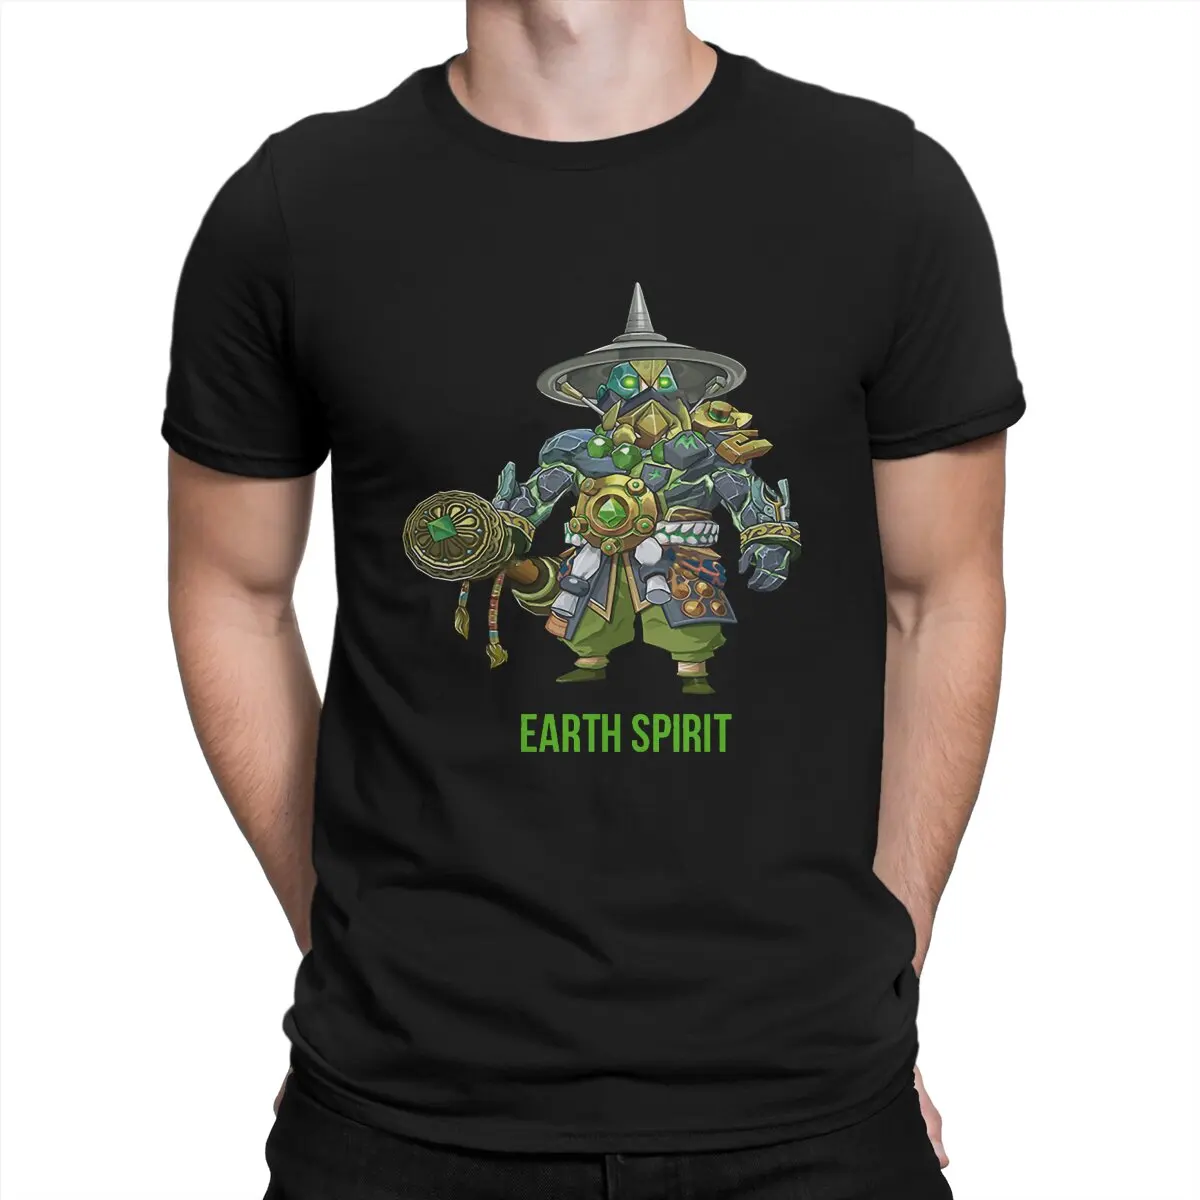 

EARTH SPIRIT T Shirts Men's Cotton Funny T-Shirt O Neck DOTA Real Time Strategy Game Tee Shirt Short Sleeve Clothing Graphic